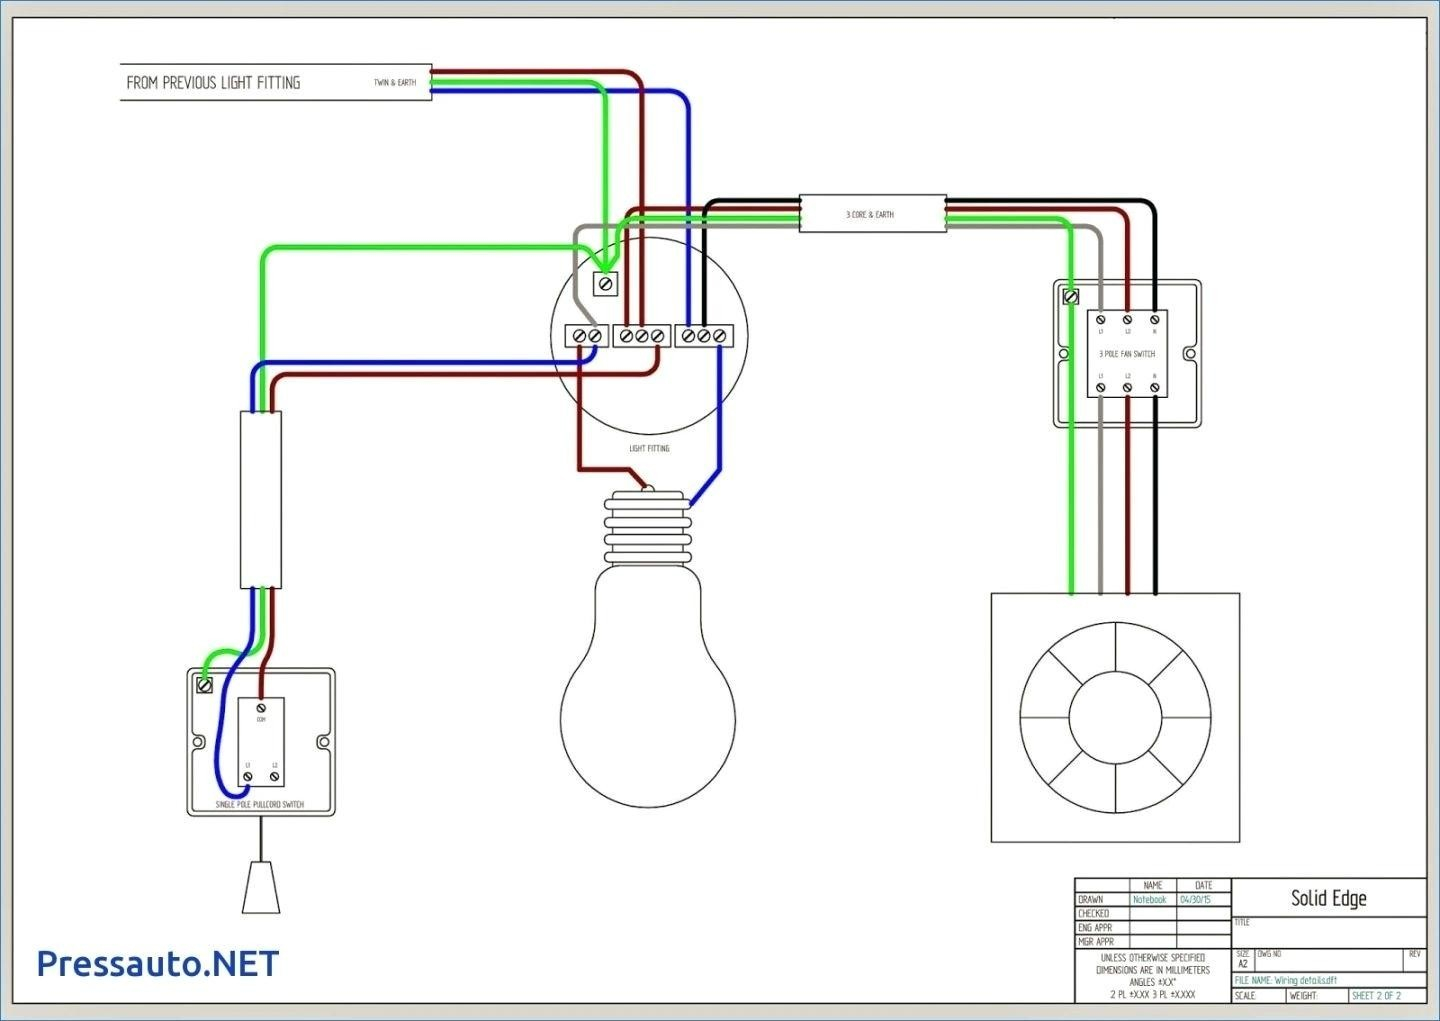 Light Switch Wiring Diagram Household Wiring Light Switch Diagrams Wiring Diagram